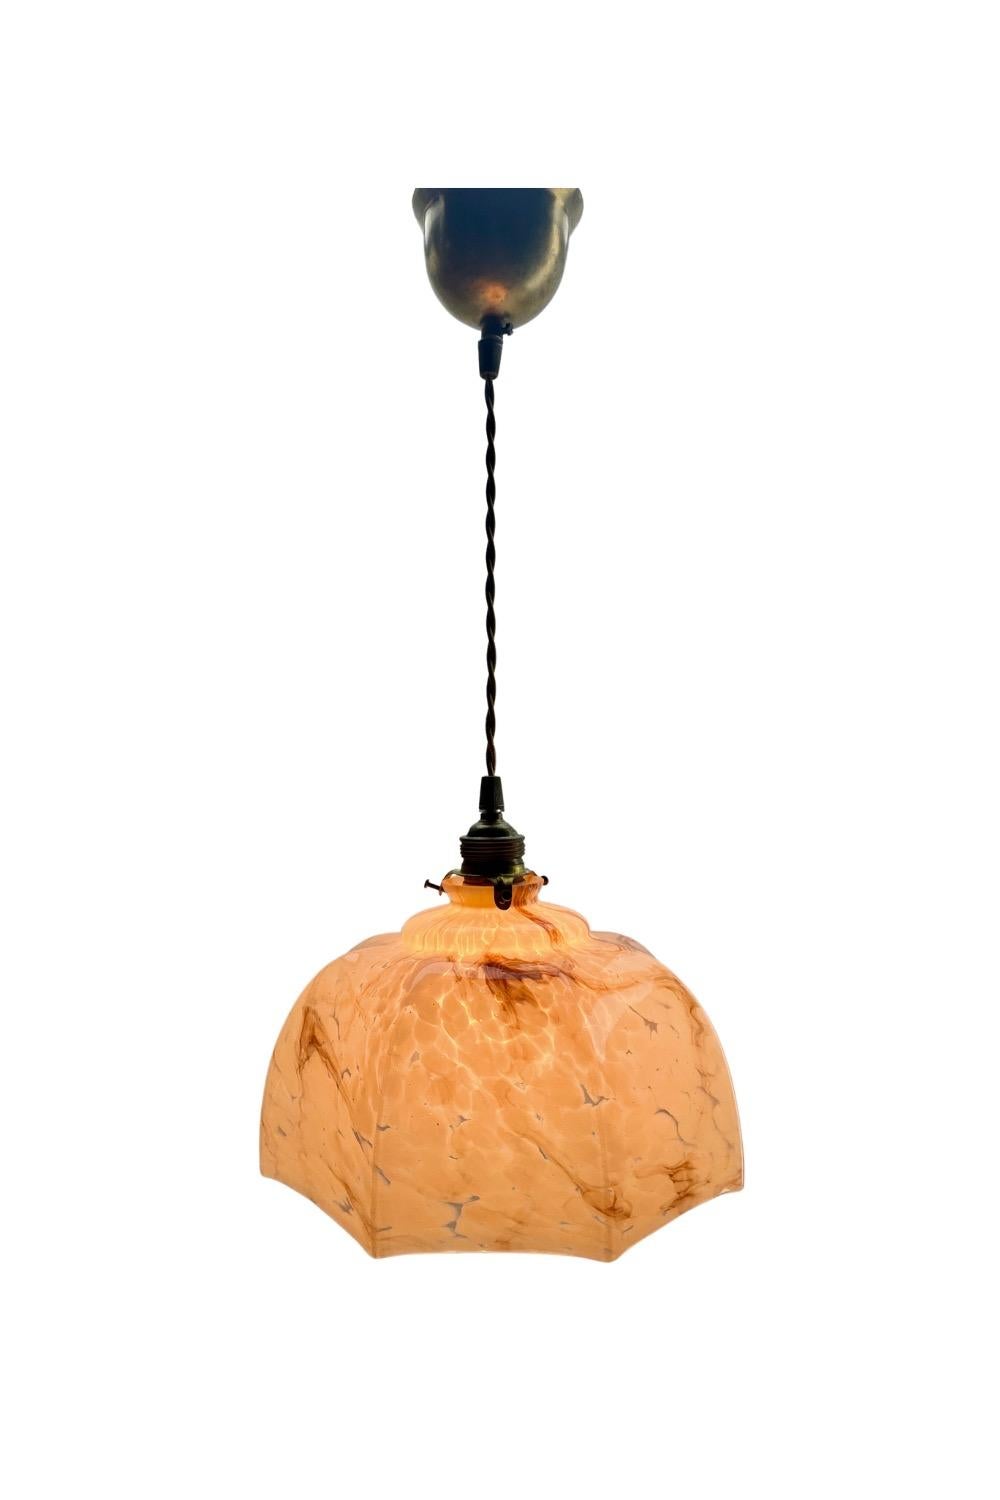 Art Nouveau ceiling lamp.
Photography fails to capture the simple elegant illumination provided by this lamp.

Fitting messing pendant ceiling light with fixing to hold a stylish Belgian Art Deco lampshade. 
Good distribution of darker and lighter